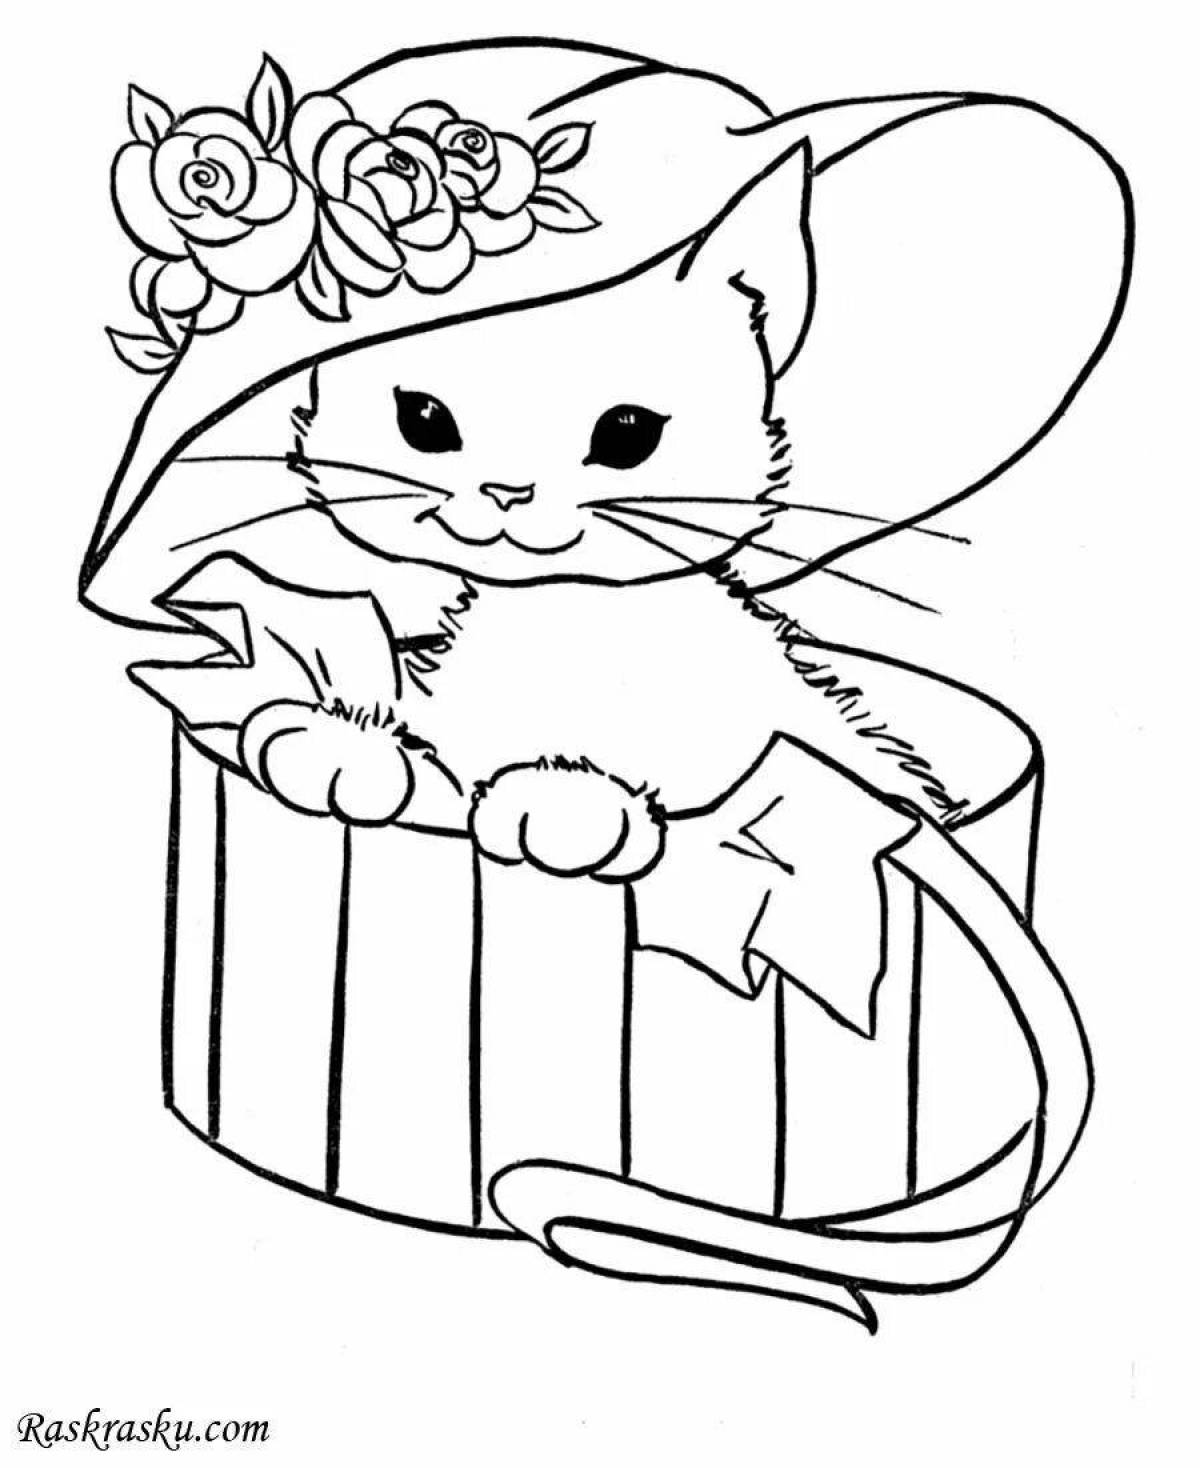 Live cat with flowers